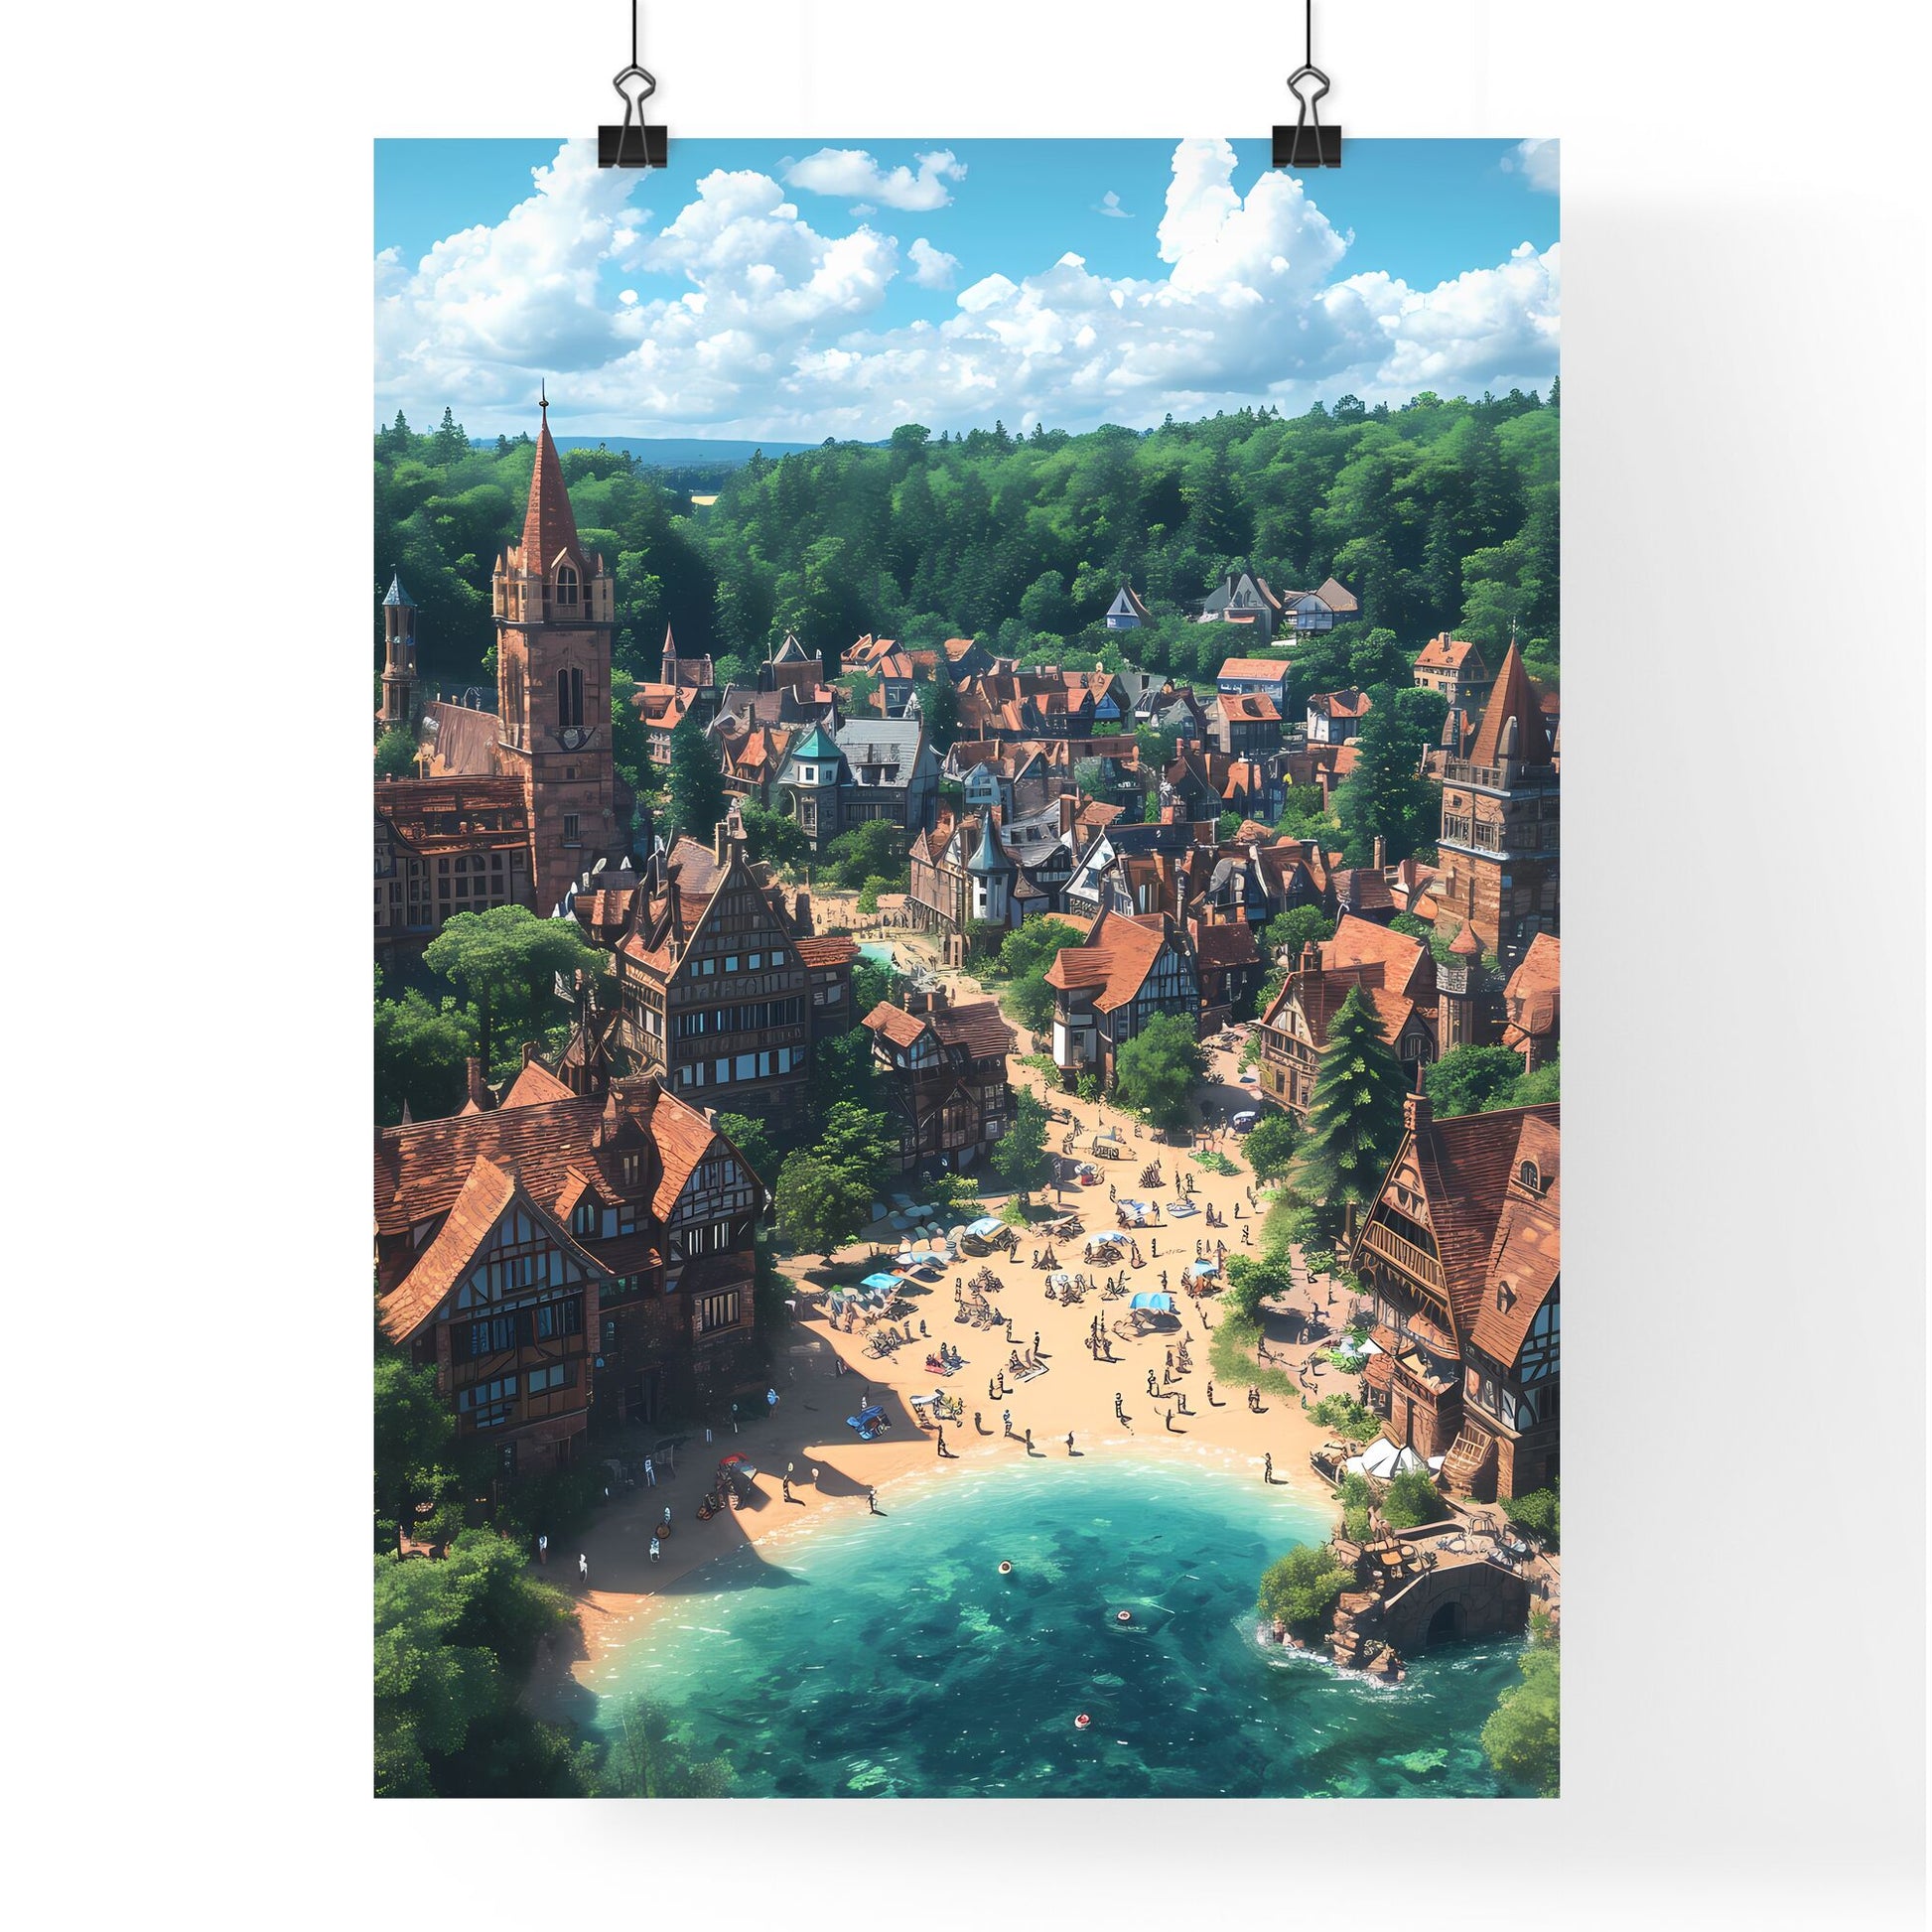 A landscape of the German countryside - Art print of a town with many buildings and a beach Default Title